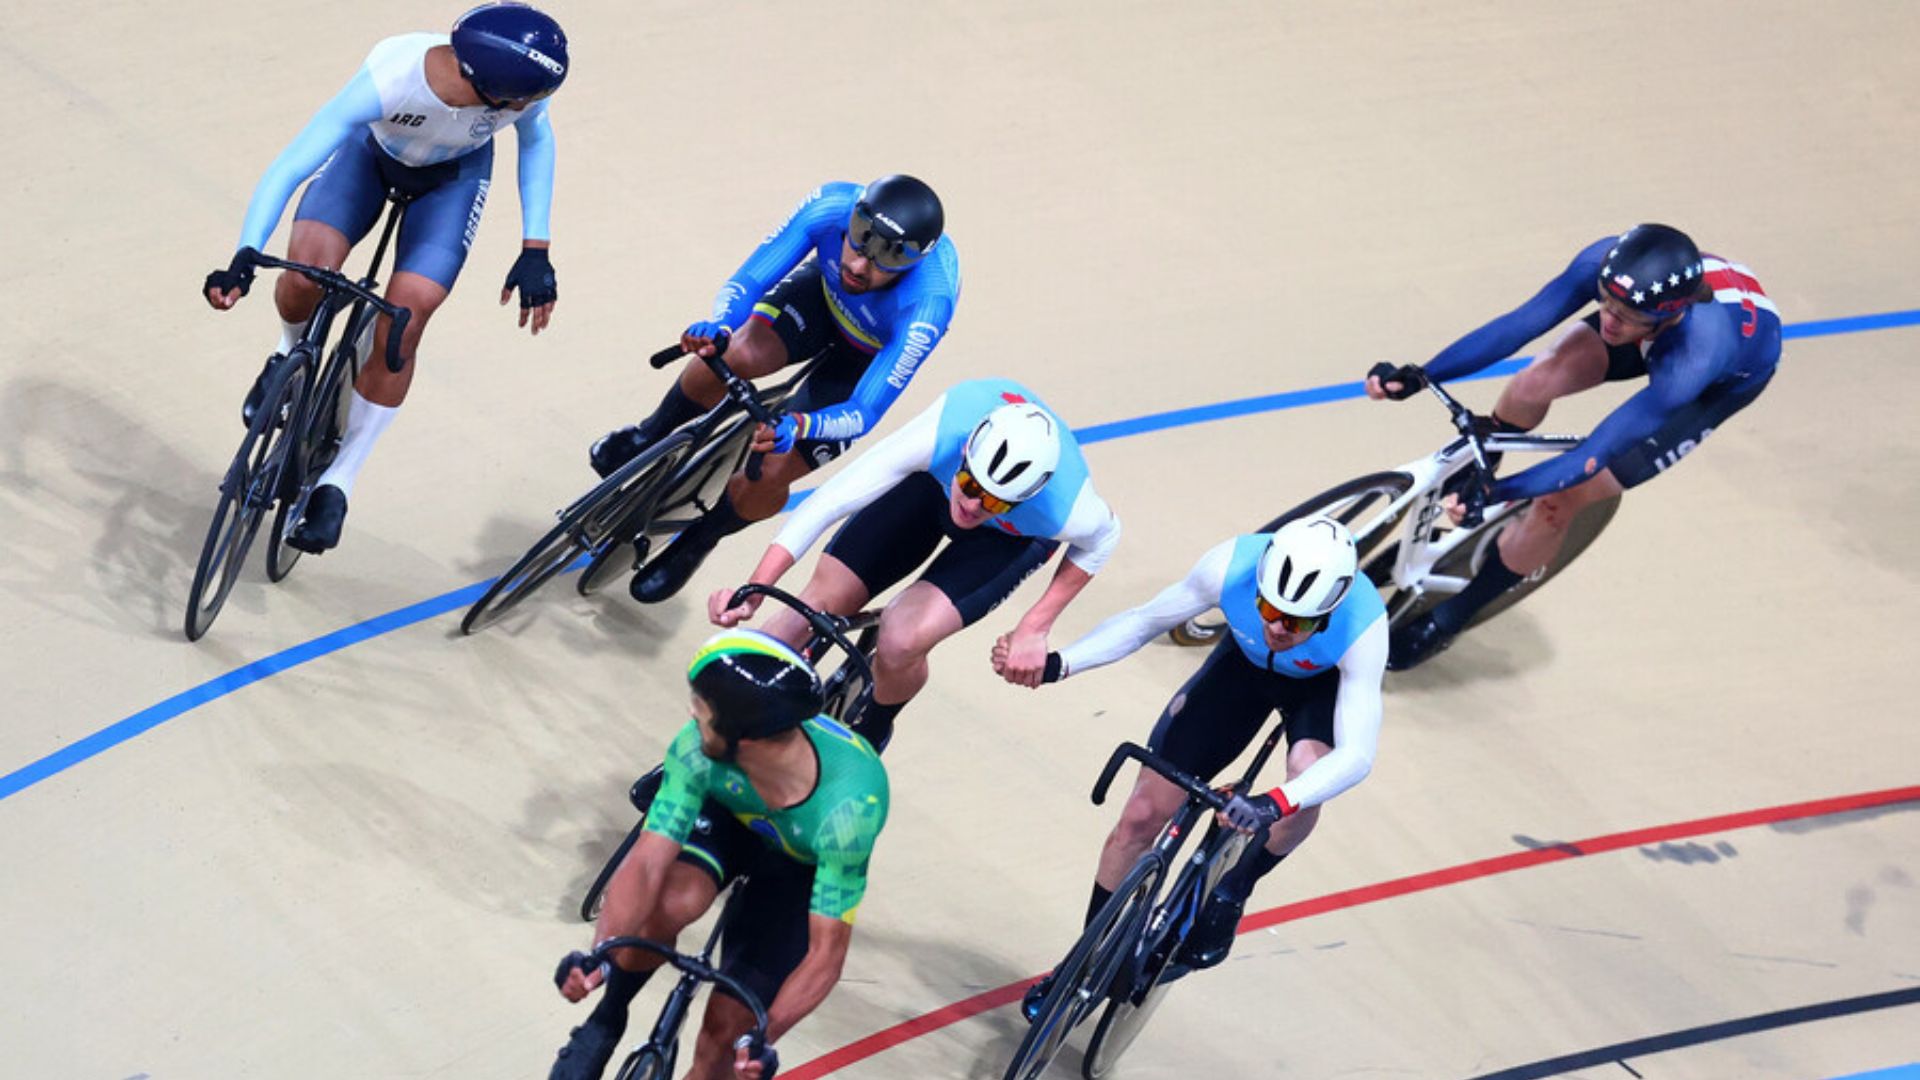 Track cycling concludes with Mexico as the champion in the male's Madison